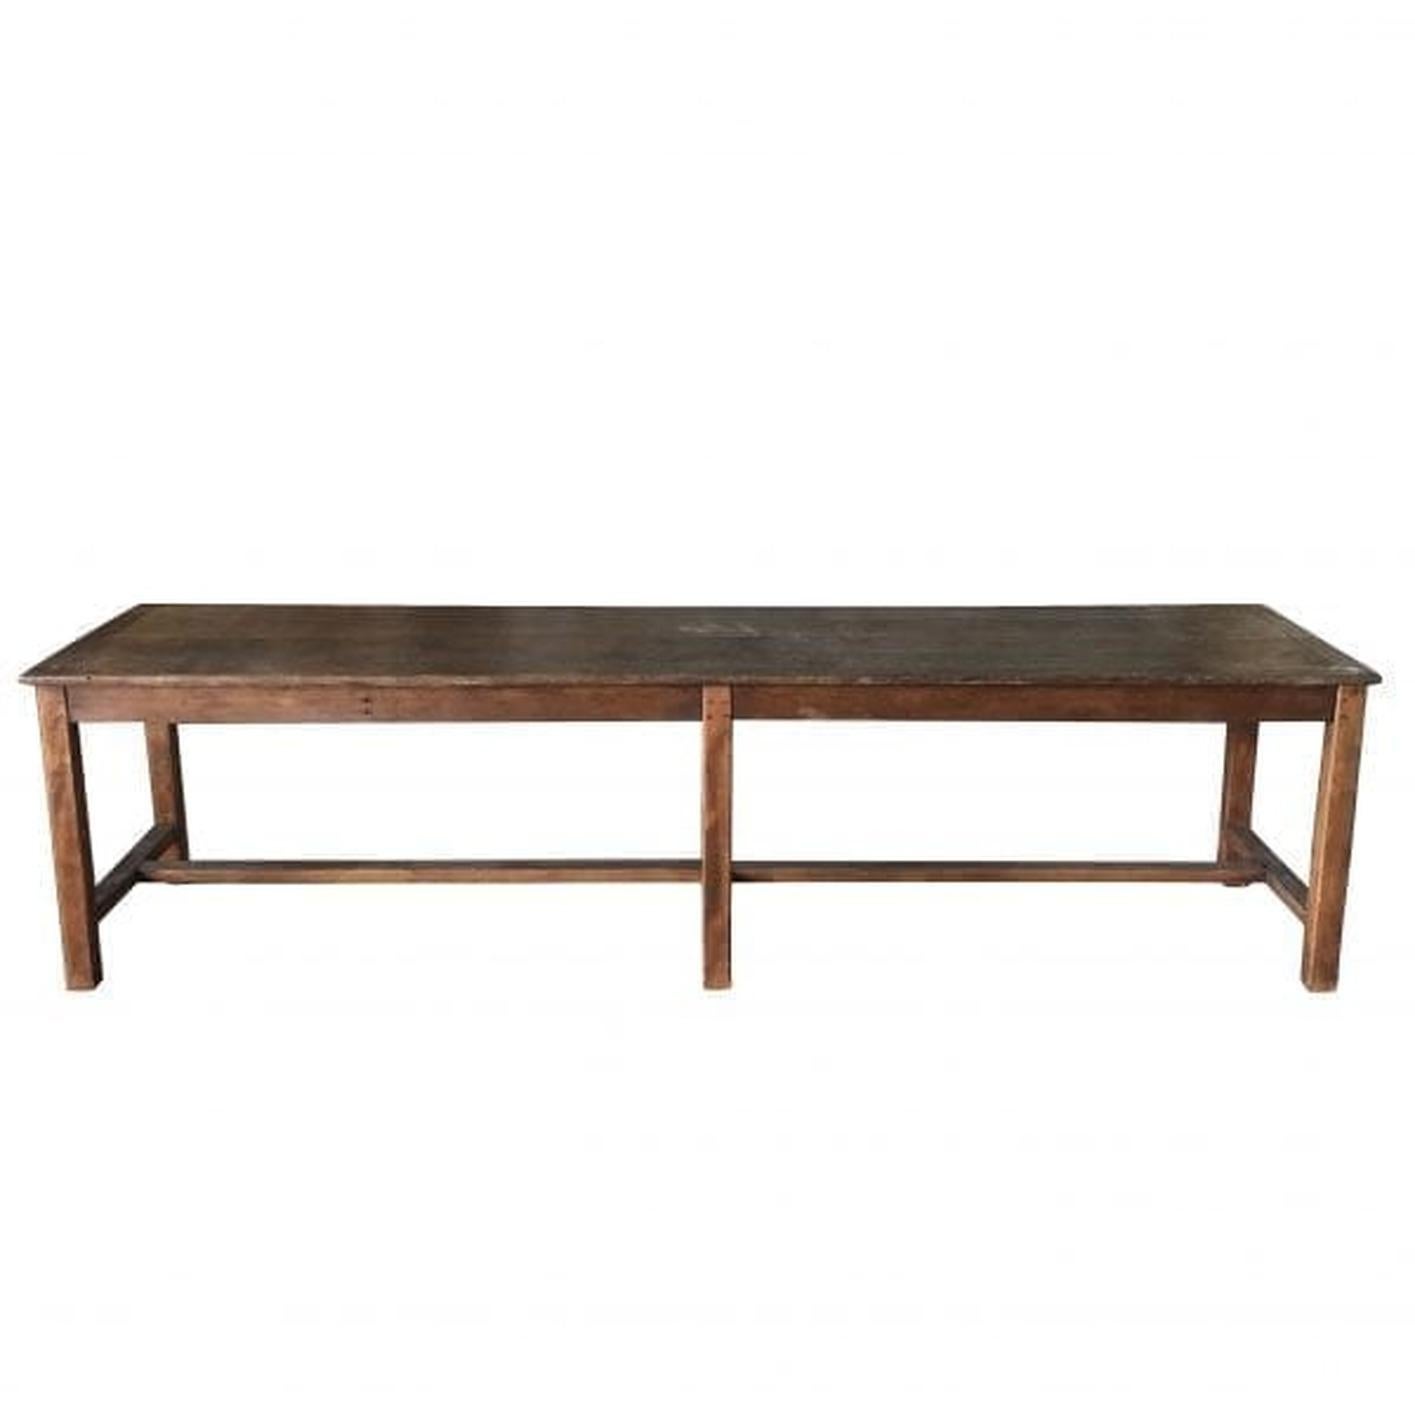 A very long narrow antique French wooden table with six legs, in good condition. This table has an additional extended top pull out and is made of hand carved, dark walnut with a waxed finish. Wear consistent with age and use, circa 1890, France.